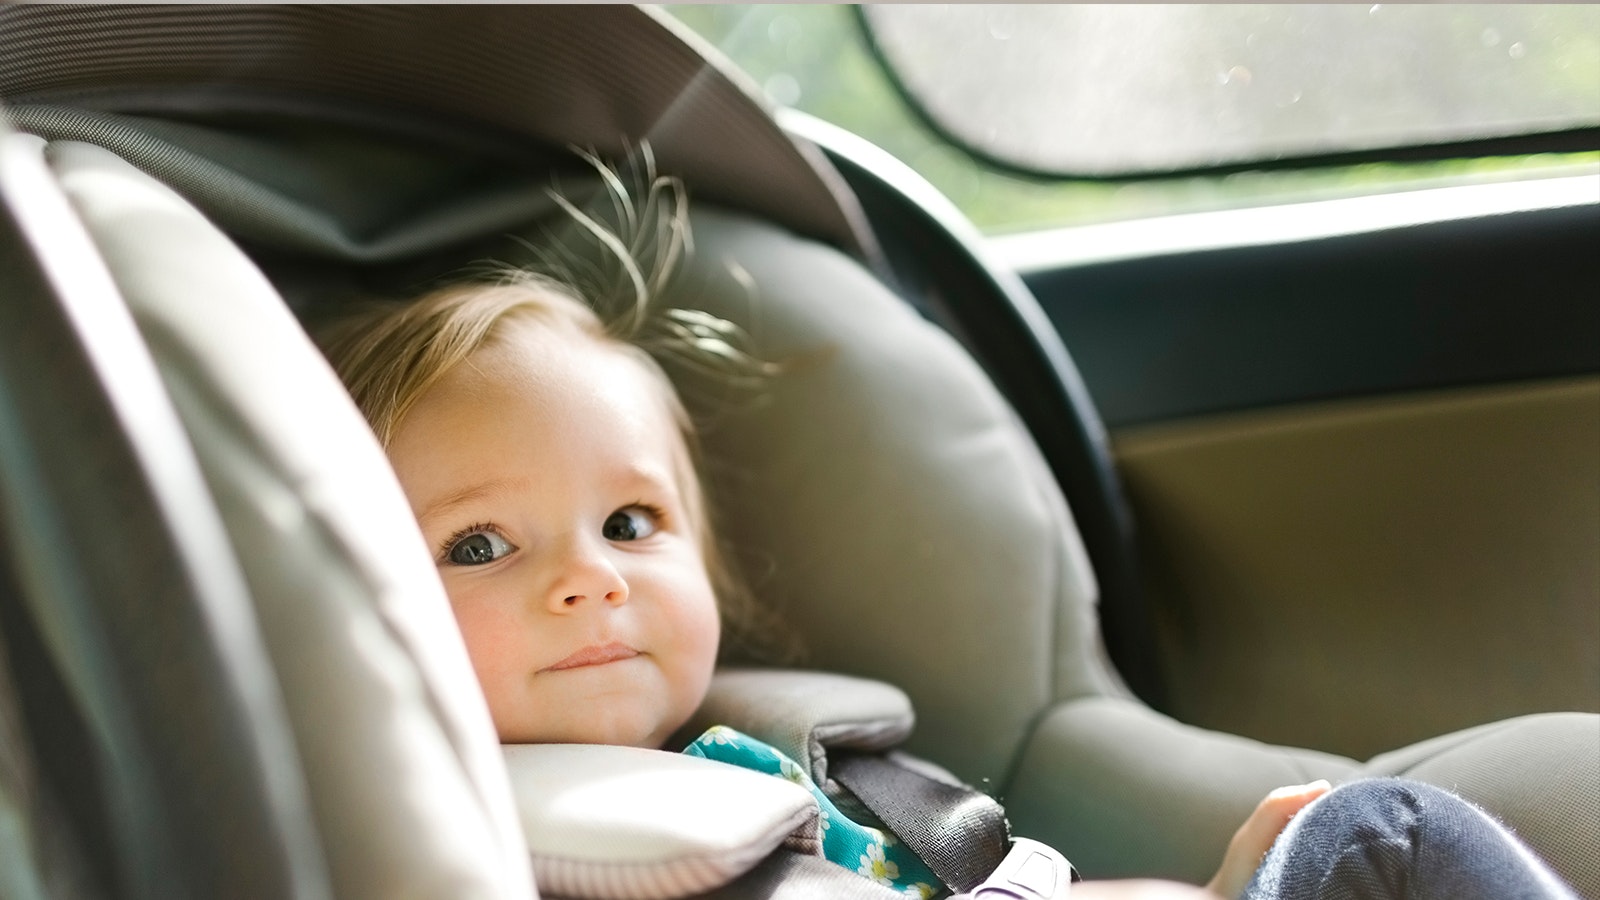 How long can a baby be in a car seat?